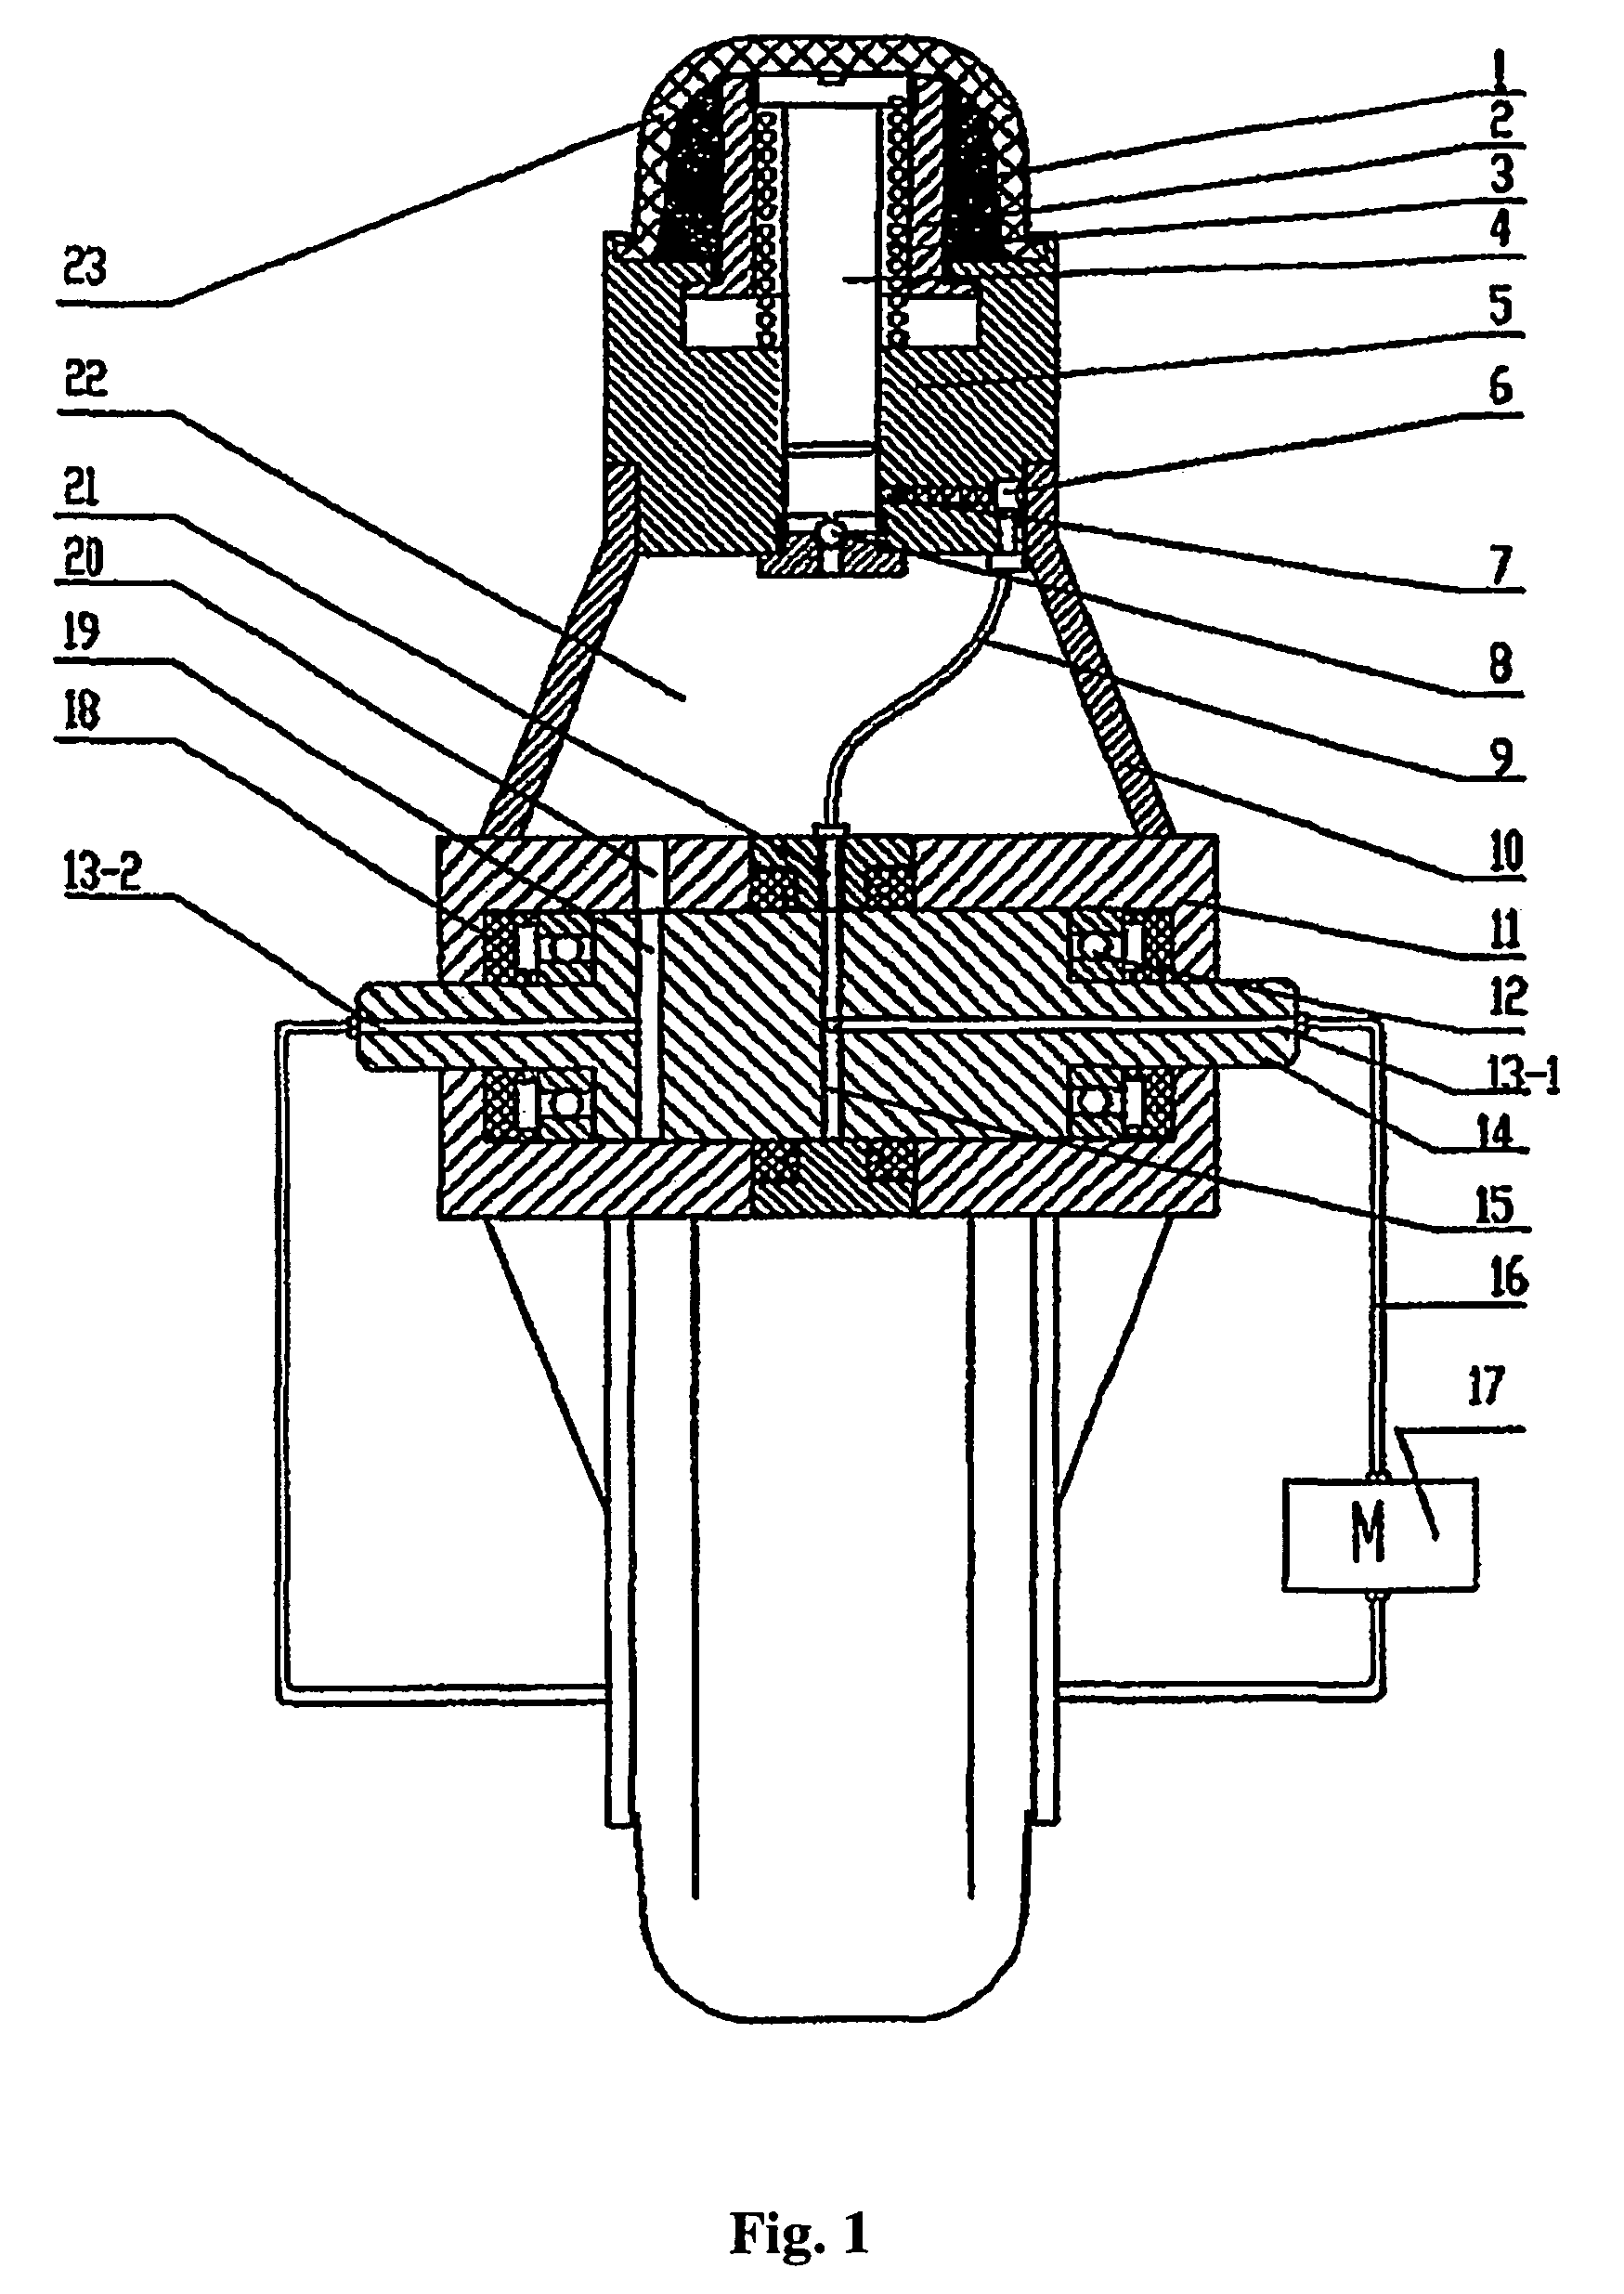 Energy conversion apparatus for wheeled vehicles